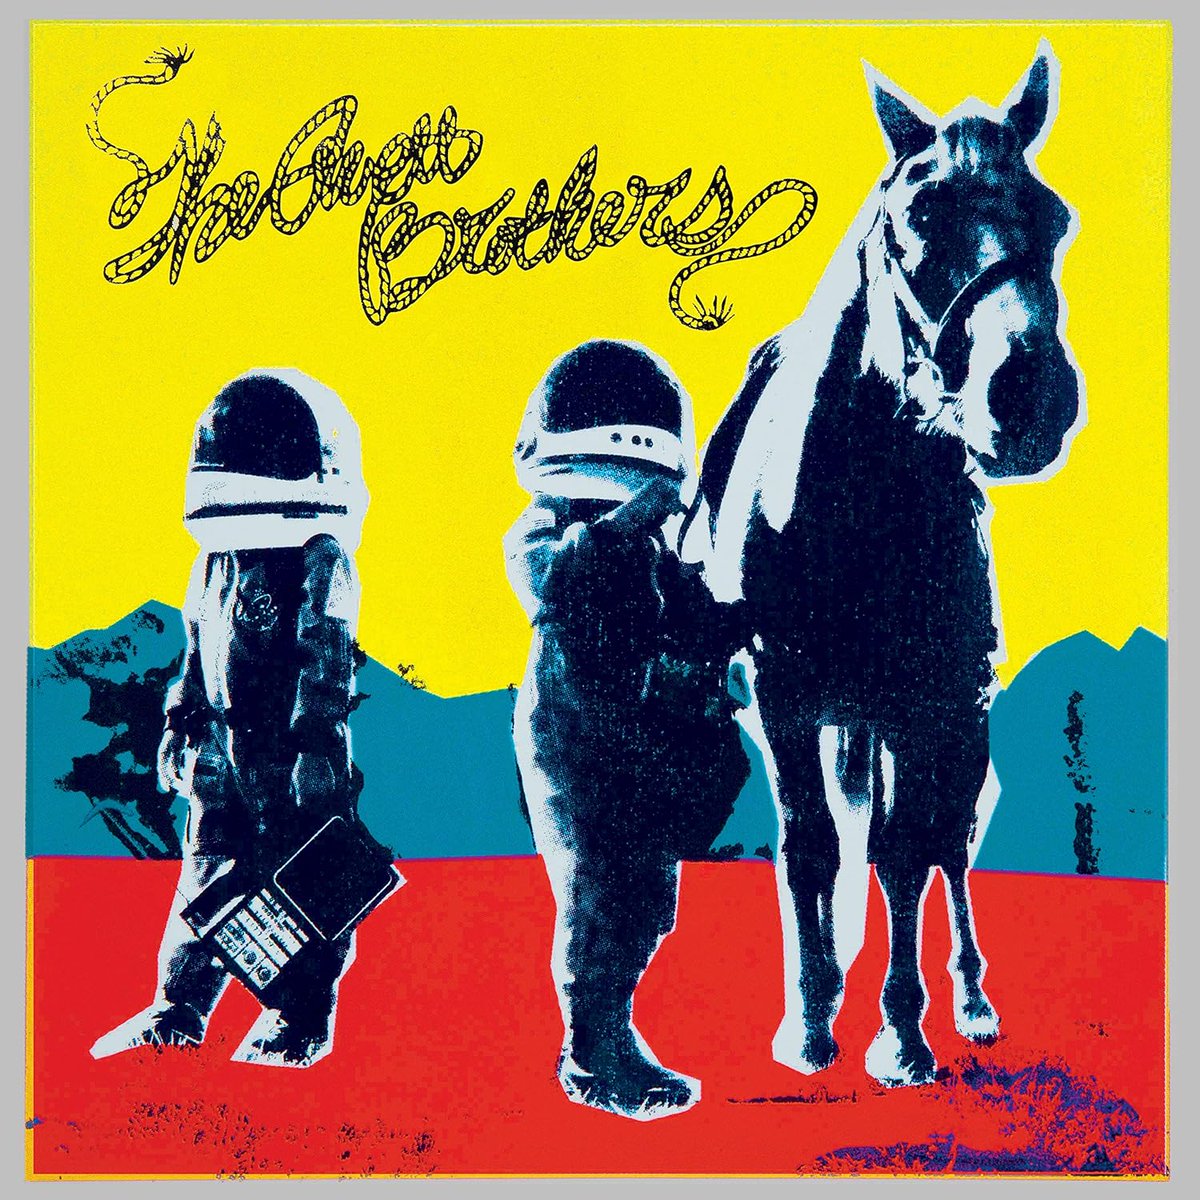 #TheAvettBrothers - True Sadness [2 LP] $23.09 (Save $9.90 at checkout) amzn.to/3KpmDdN